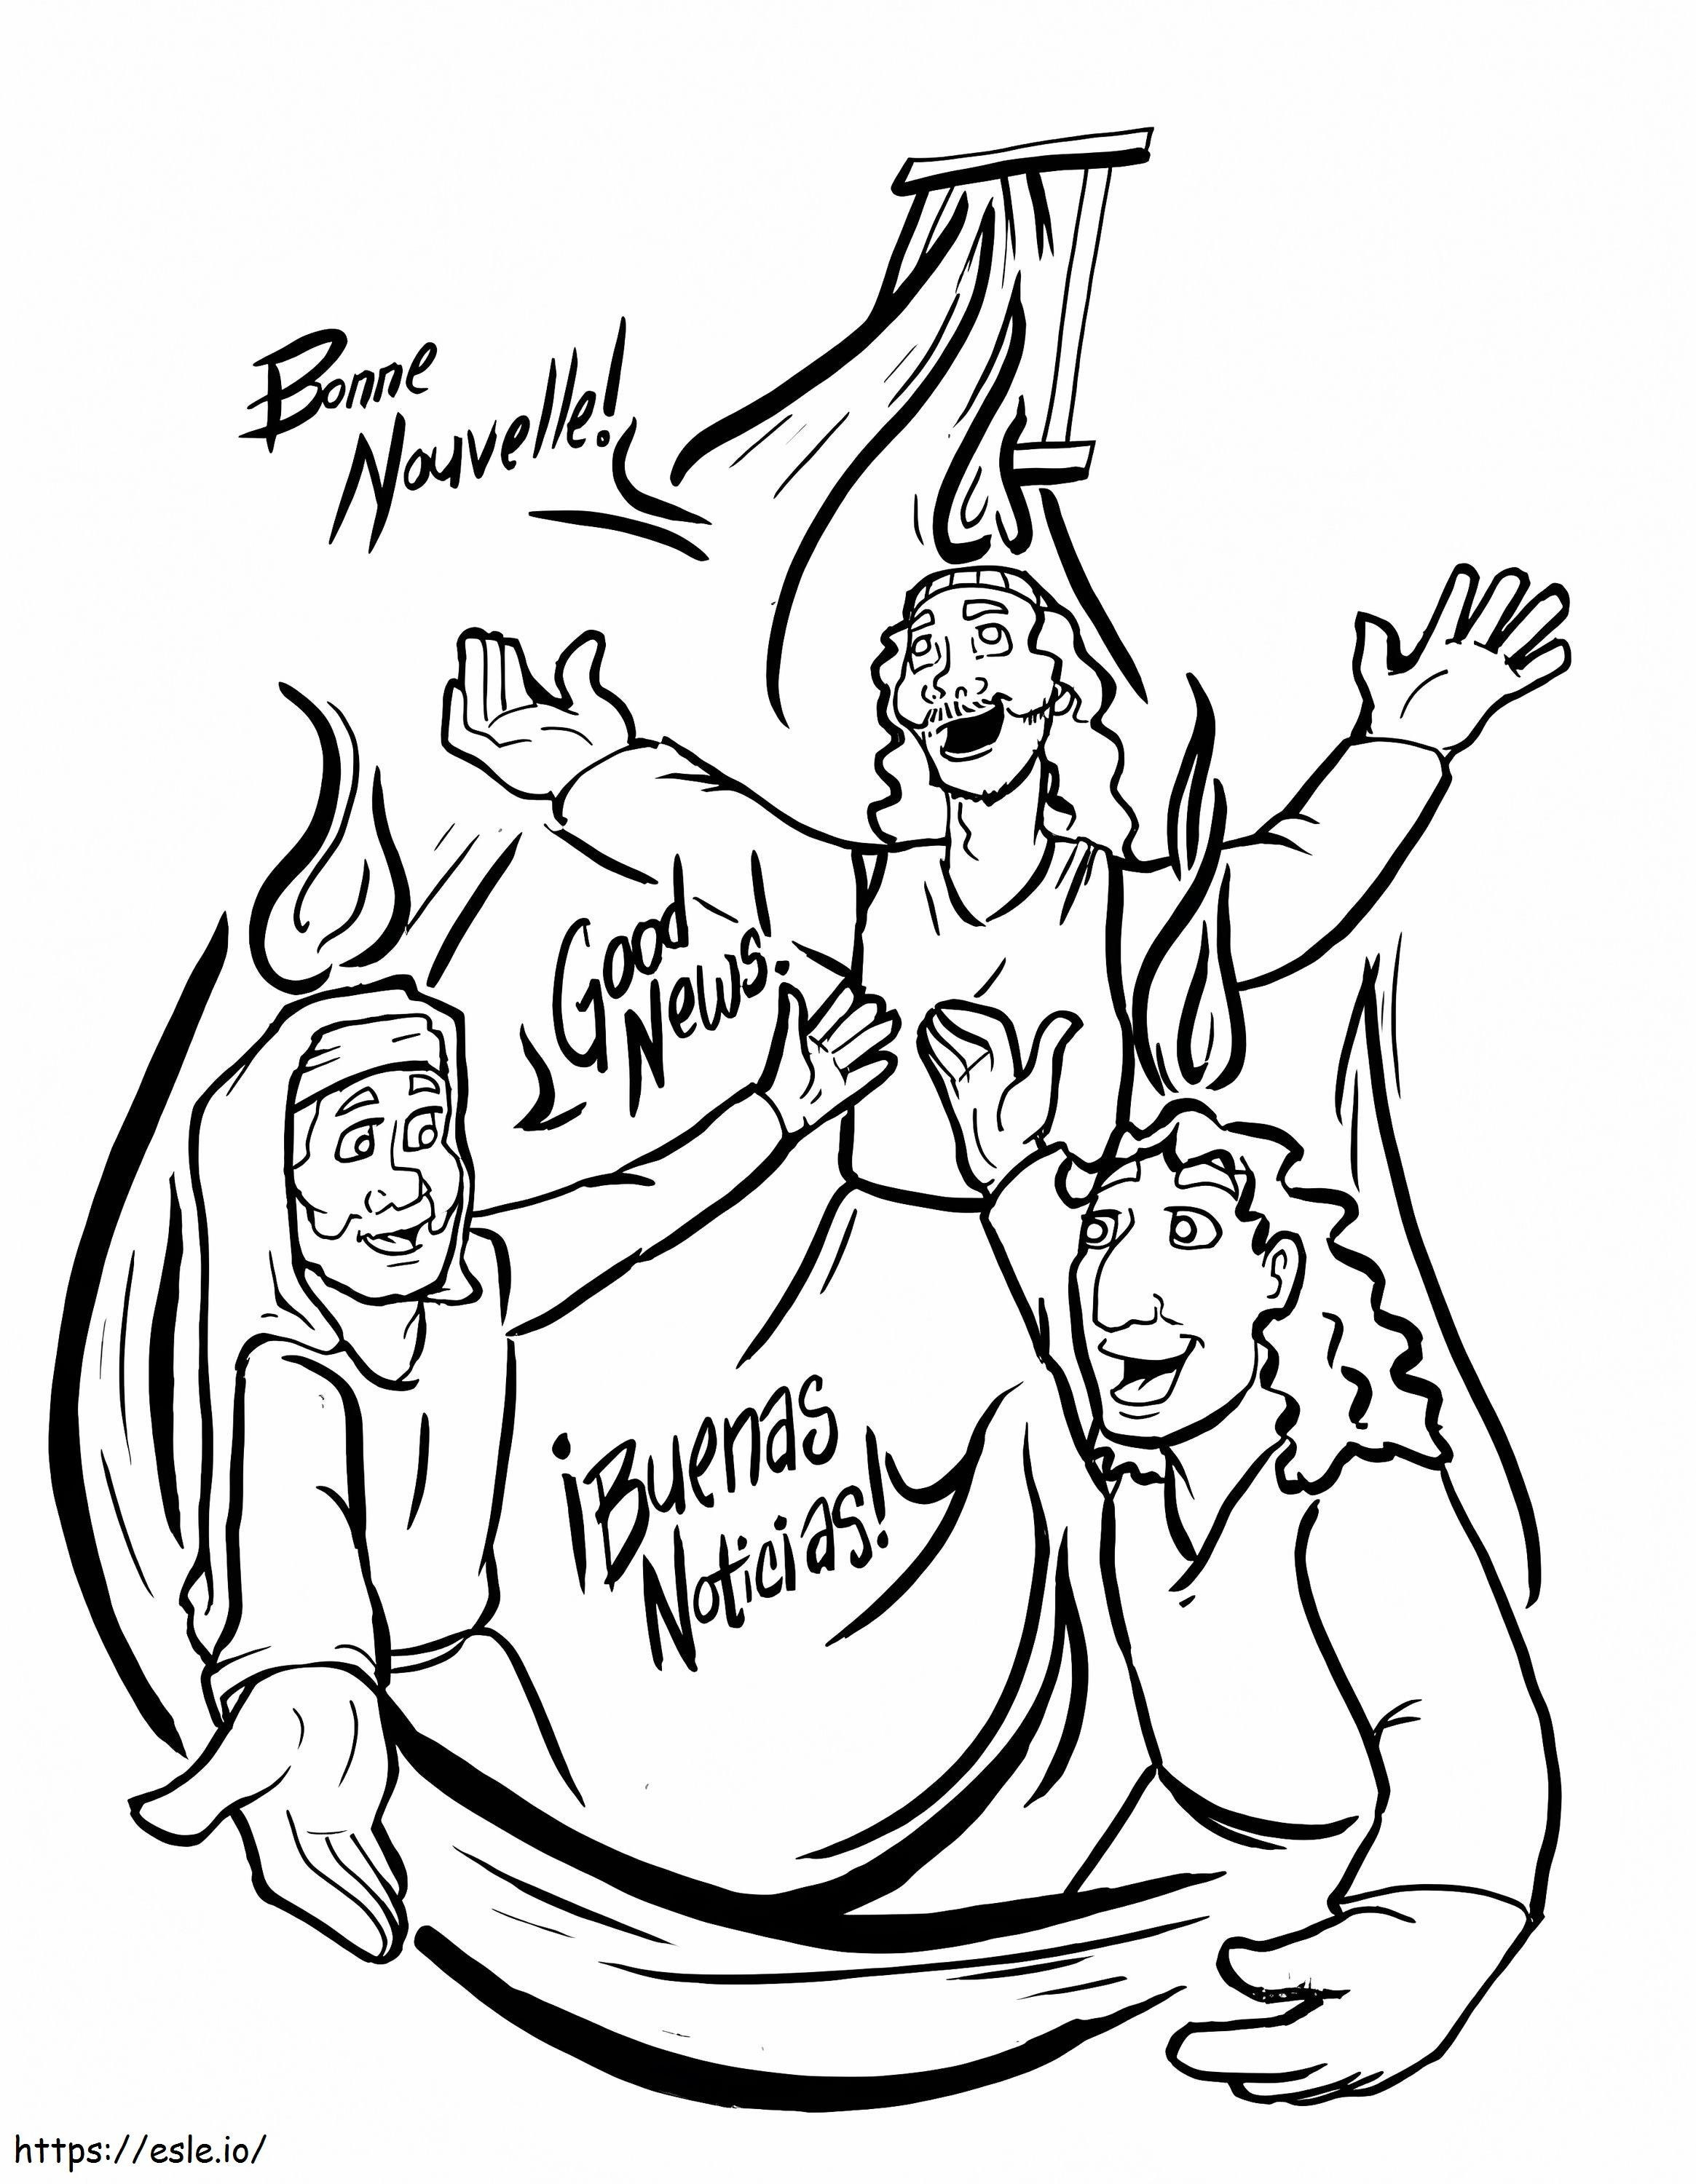 Pentecost 9 coloring page